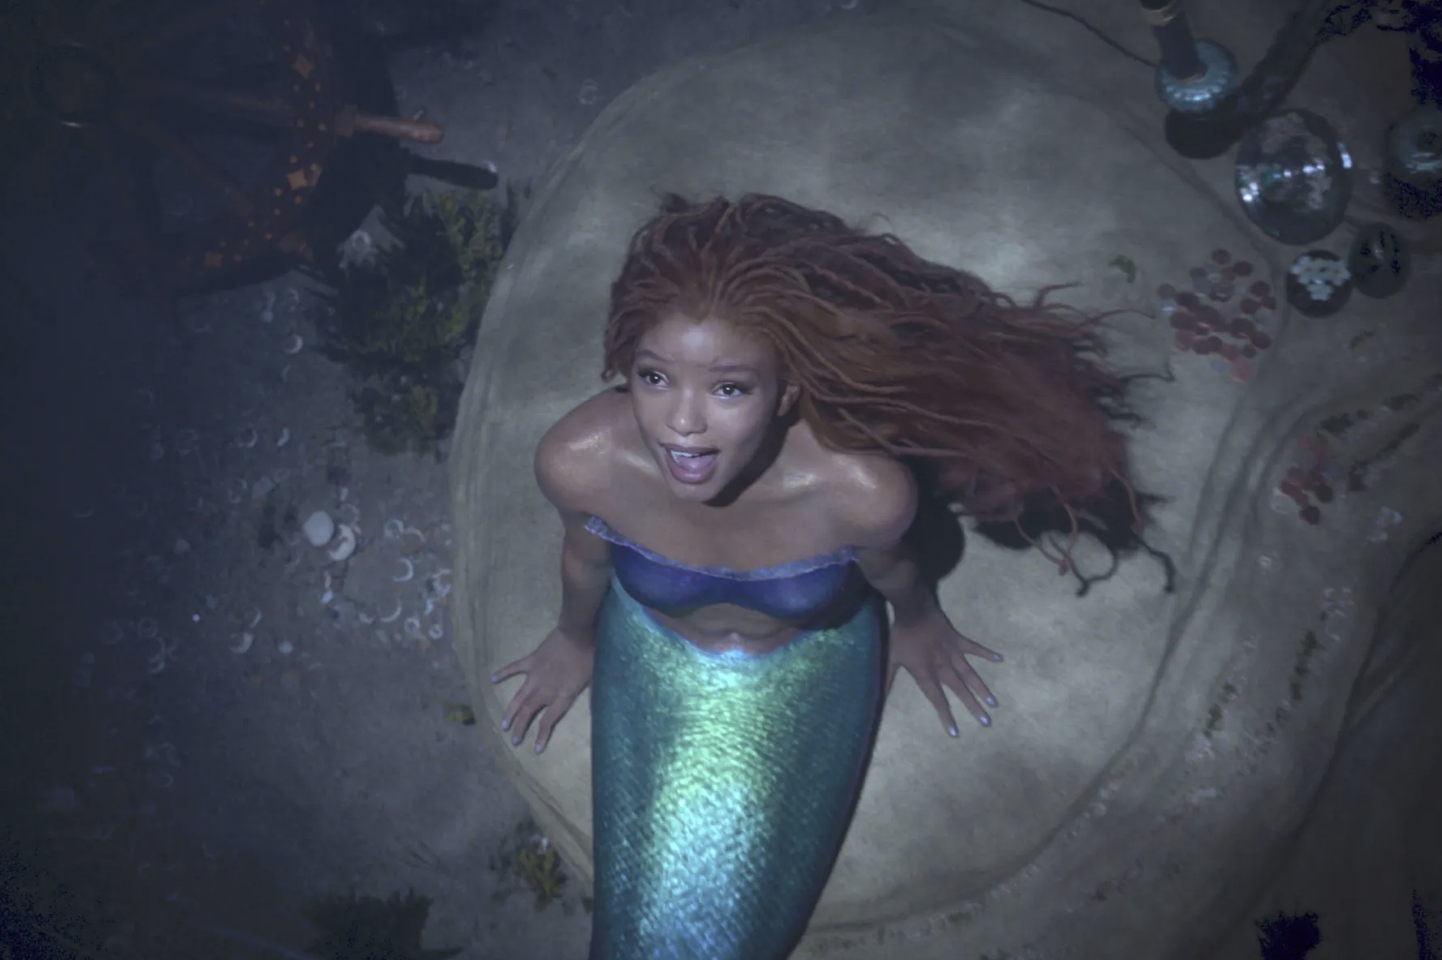 Halle Bailey’s [@hallebailey] performance in the Little Mermaid is nothing short of perfection